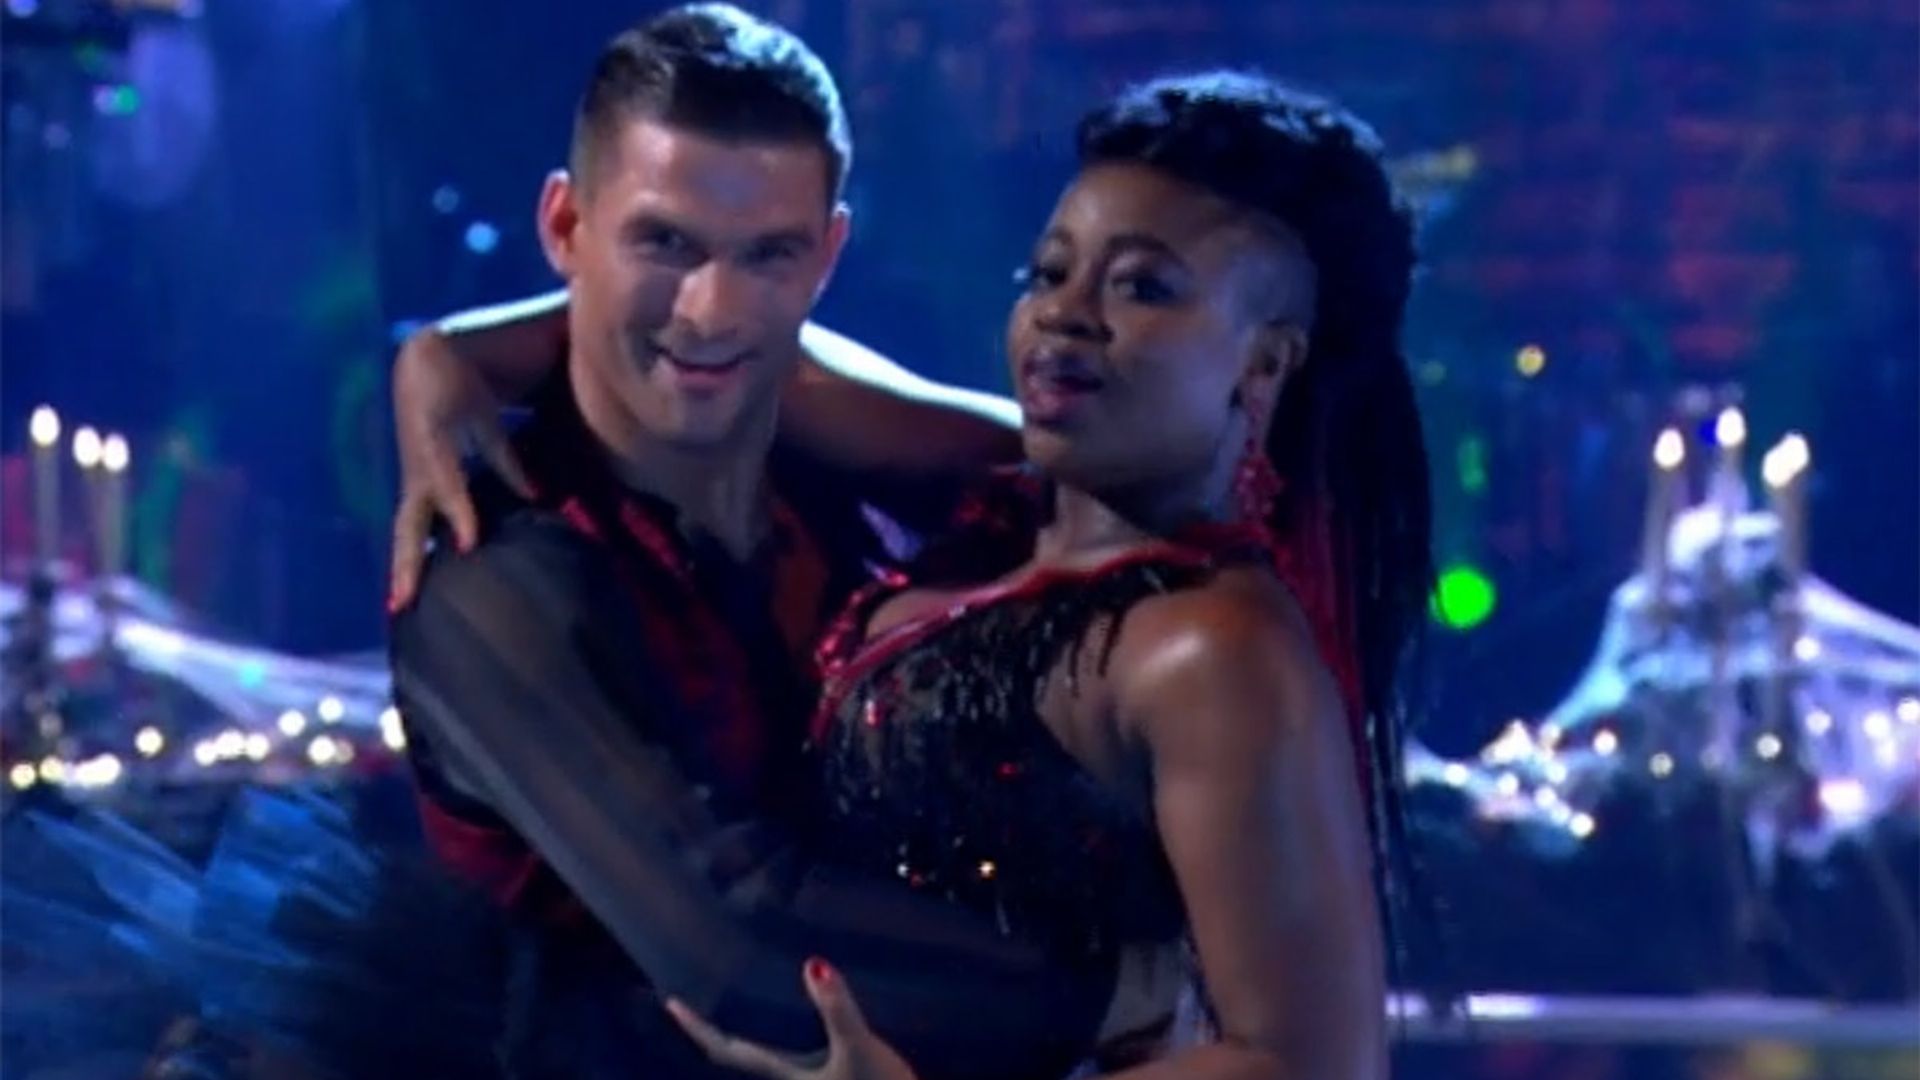 Clara Amfo suffers wardrobe malfunction during Strictly Come Dancing LIVE show